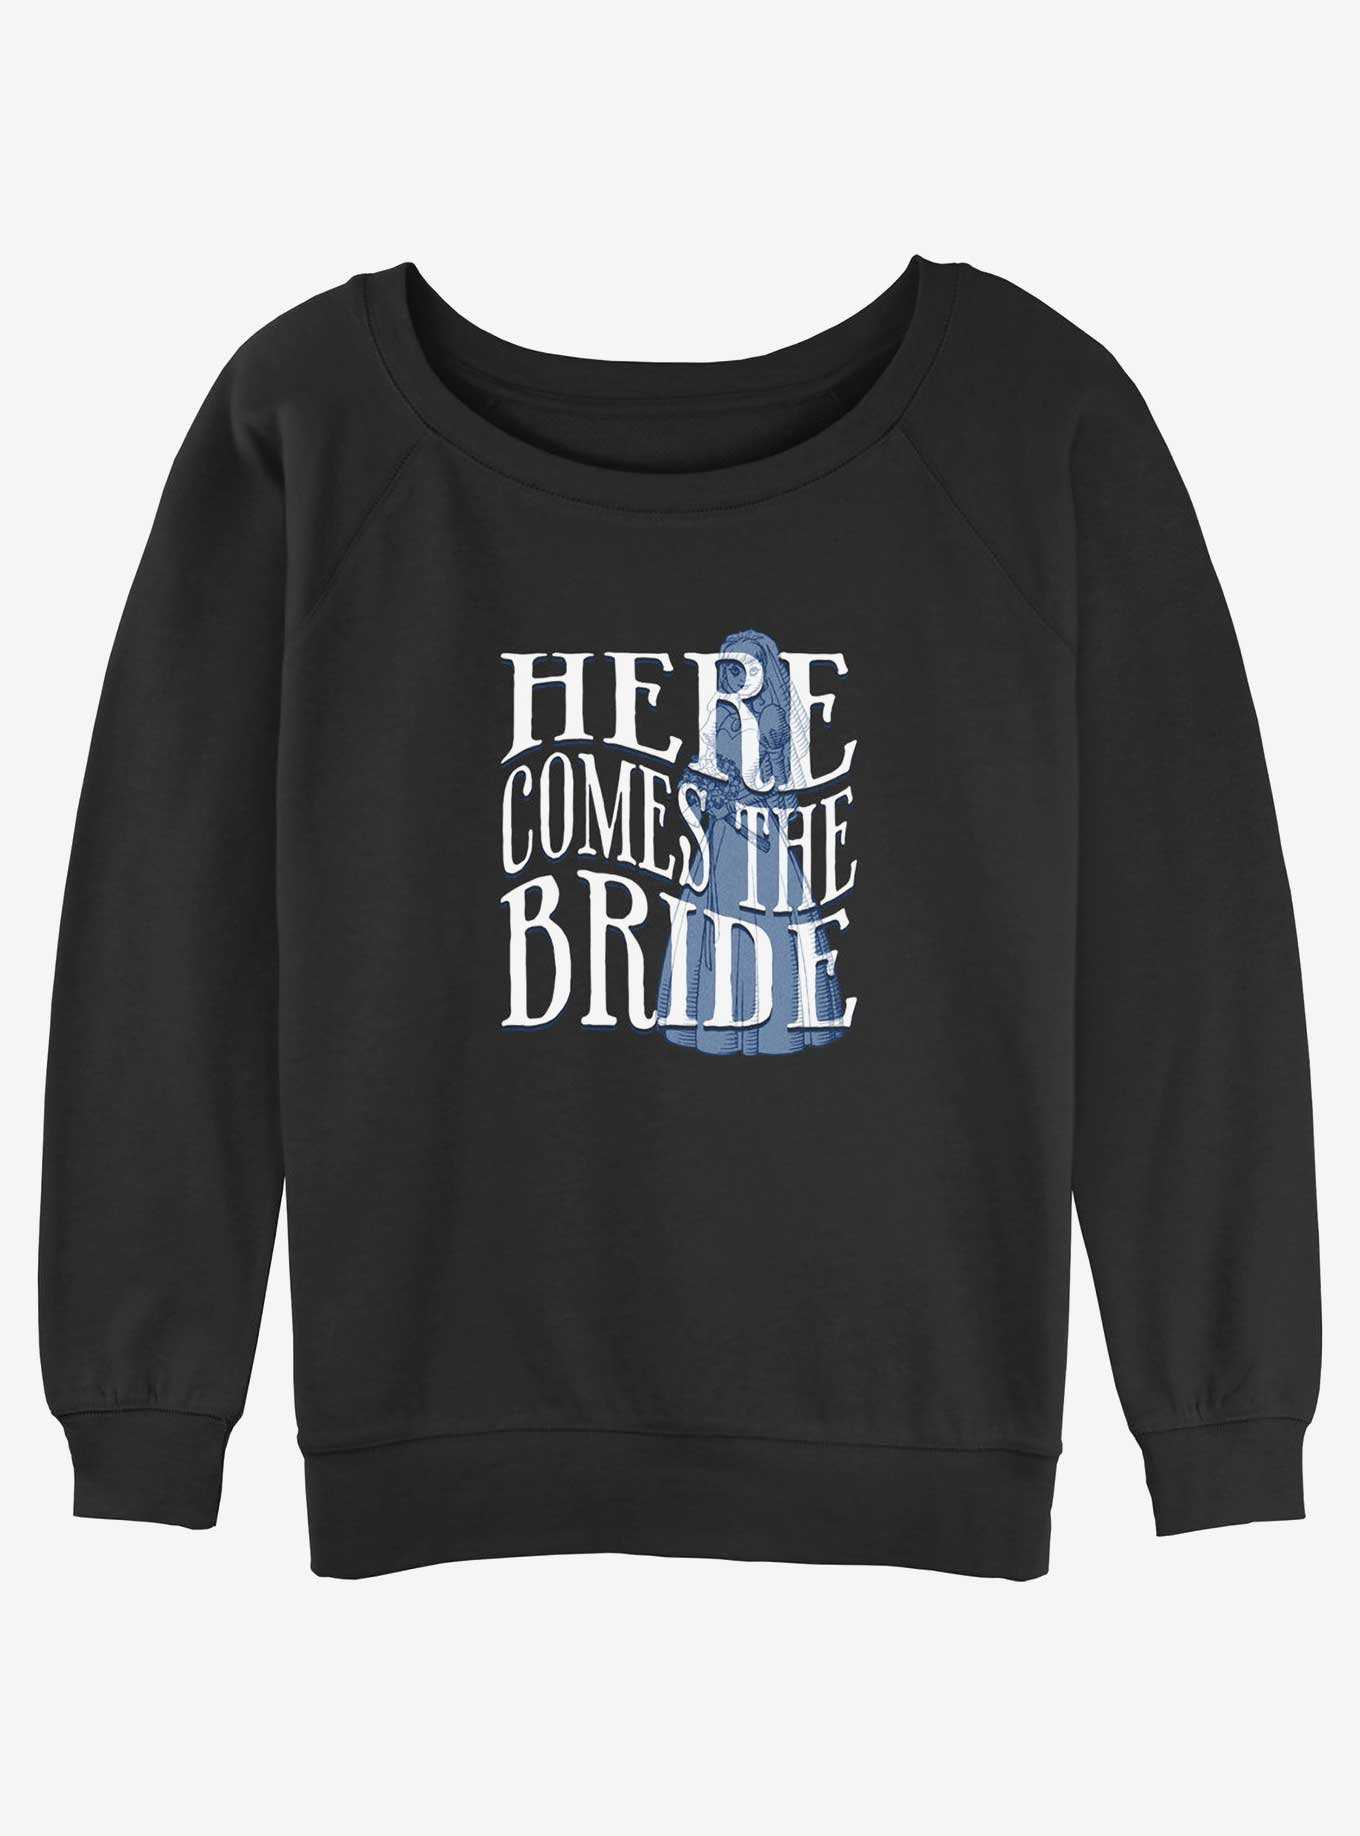 Disney Haunted Mansion Here Comes The Ghost Bride Womens Slouchy Sweatshirt, , hi-res